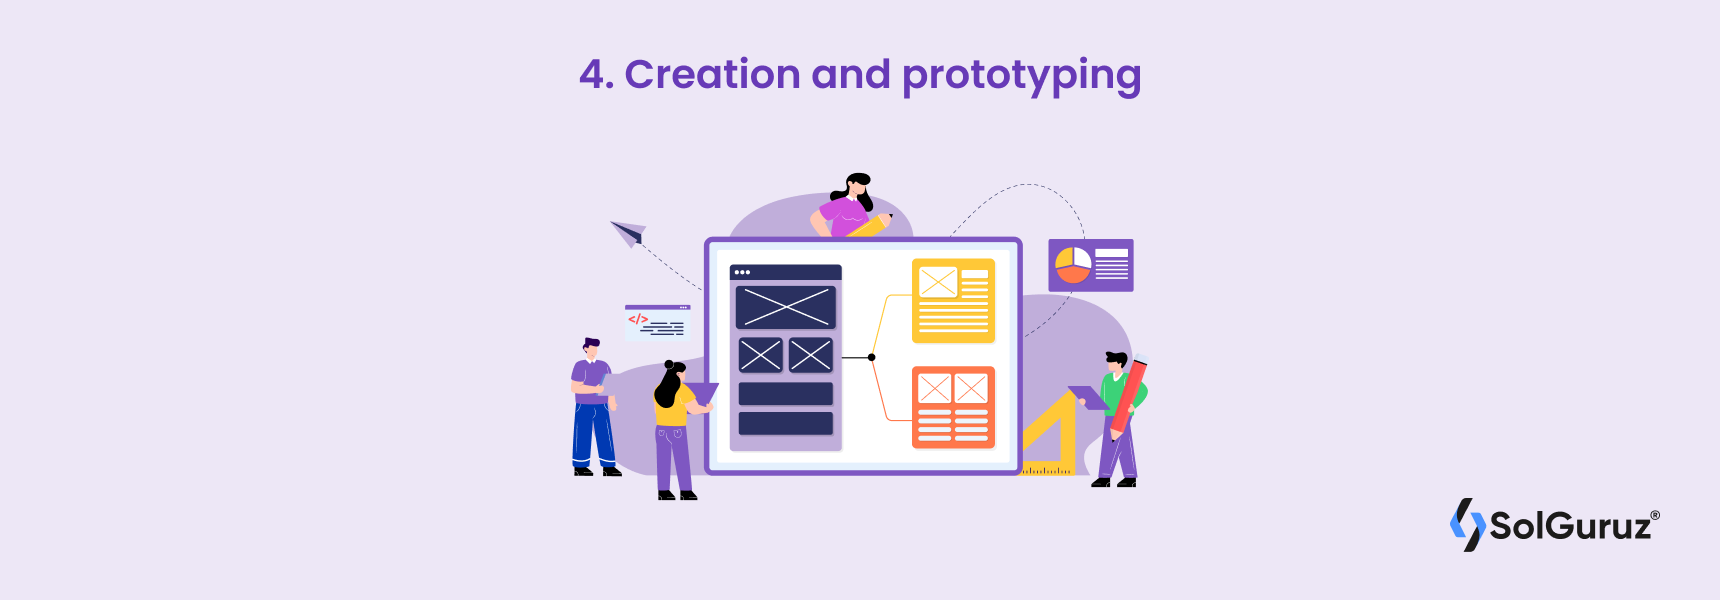 Rapid prototyping complements design sprints by facilitating the creation of simple, fast prototypes of an app that can be tested with users and refined depending on their input.